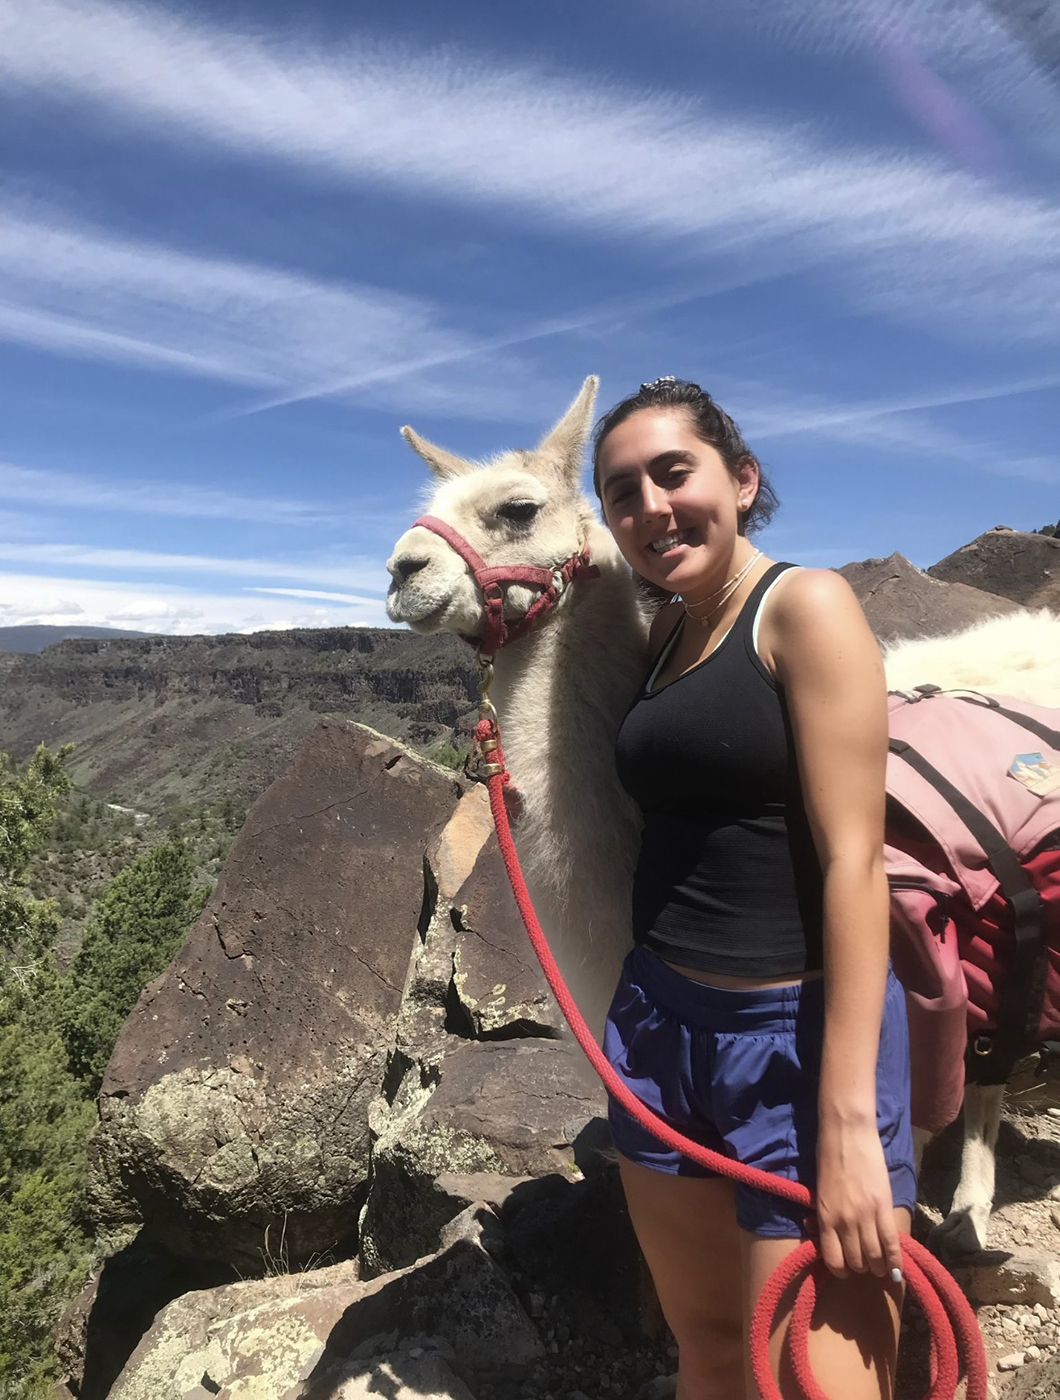 SMU-in-Taos student Aman Sergeant poses with a llama among the rocks in New Mexico